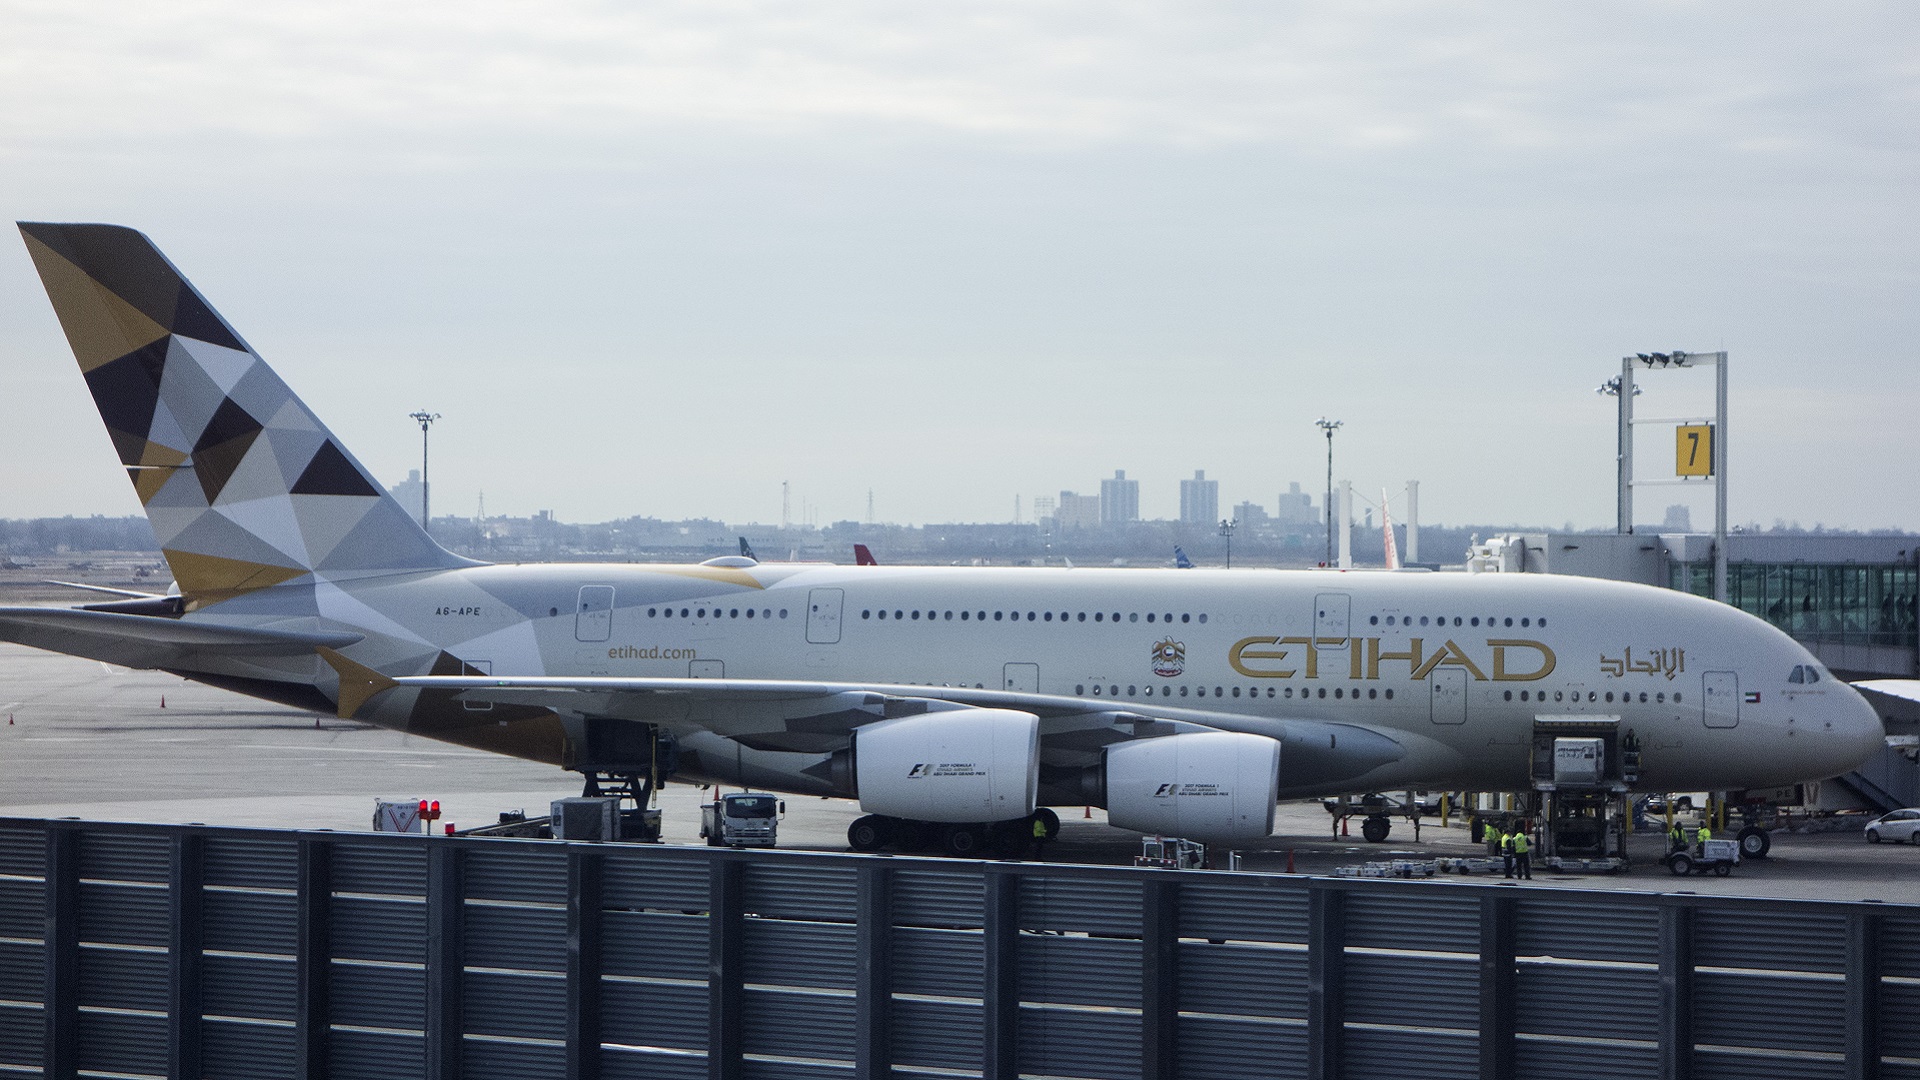 File:A plane from the ETIHAD Airways (UAE) in the blue paint of